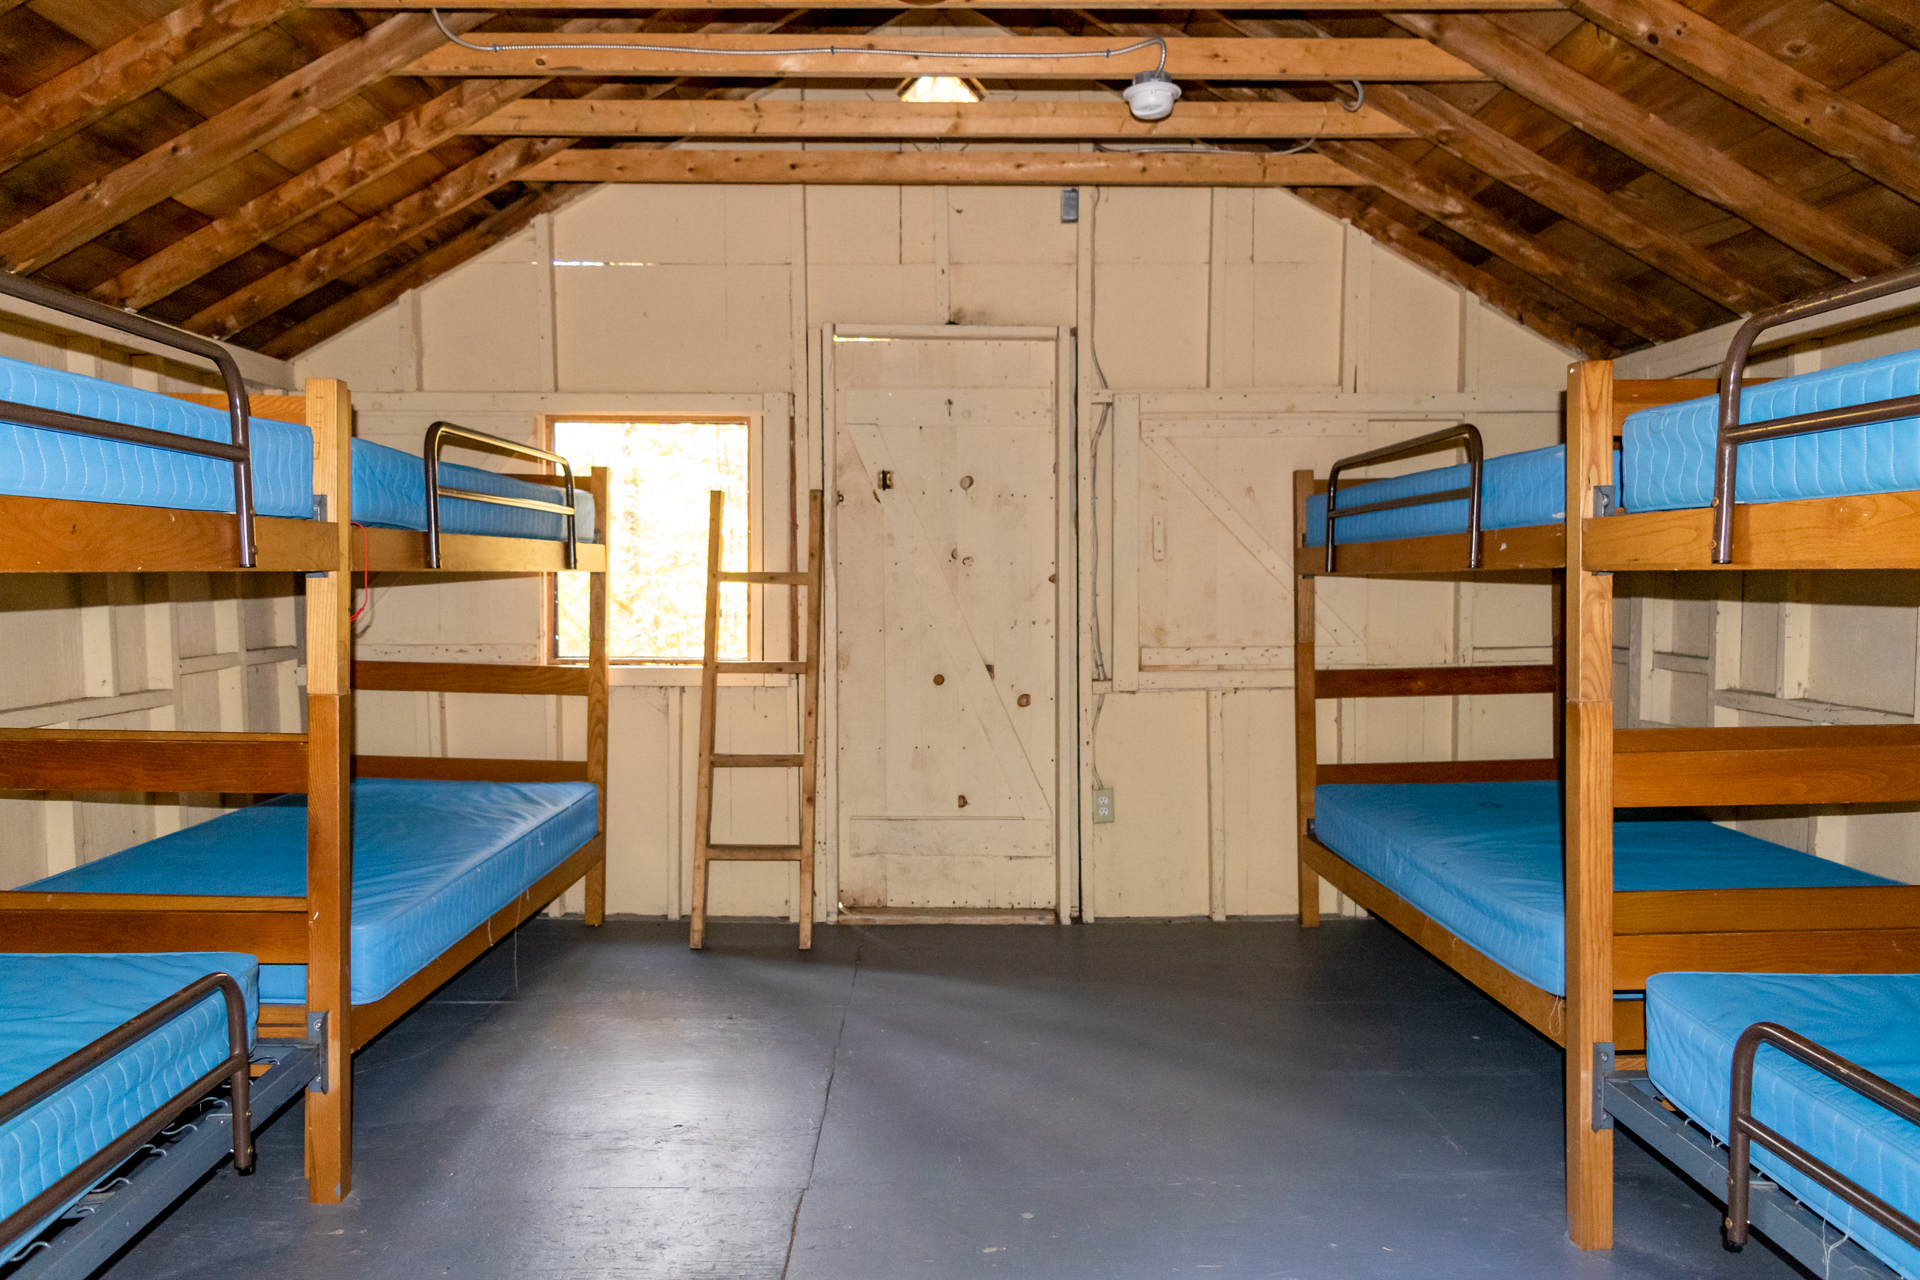 The interior of a camp cabin with wooden bunk beds and blue mattresses